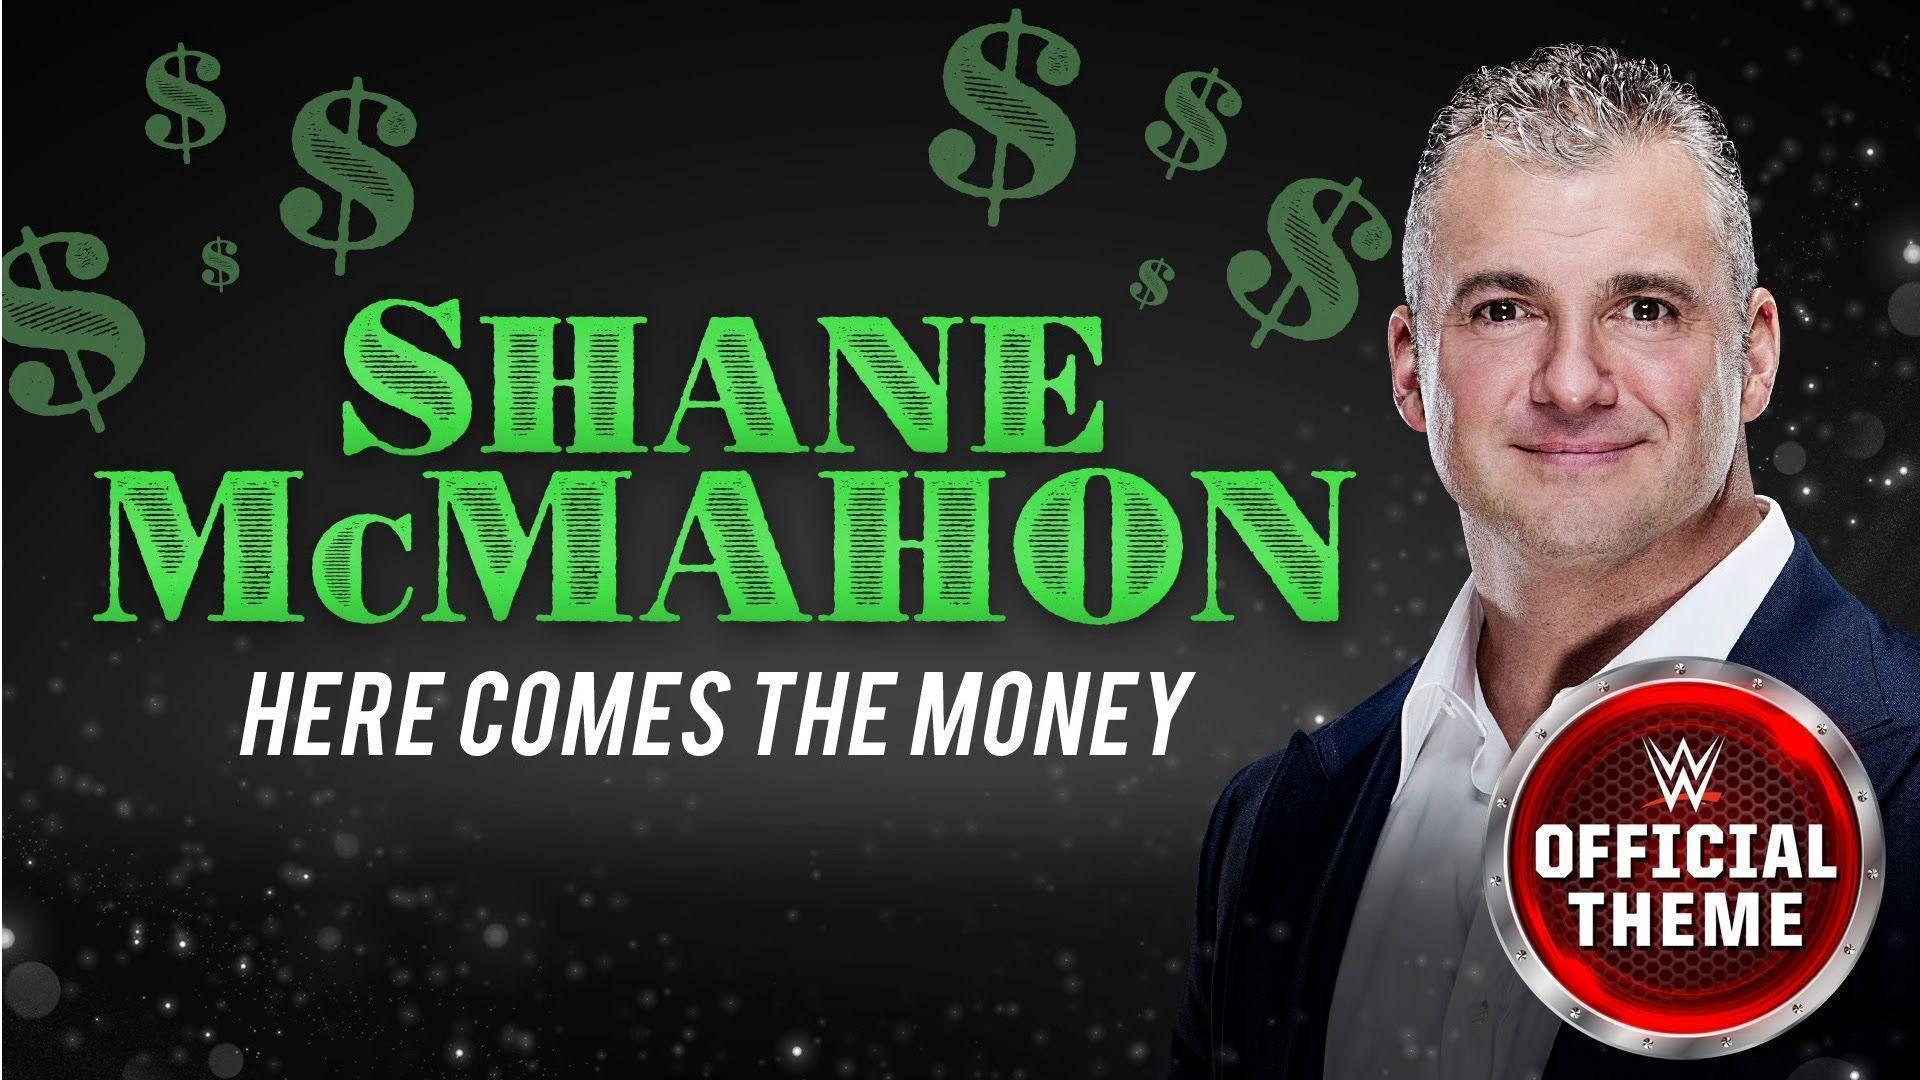 Shane McMahon Comes The Money (Official Theme)